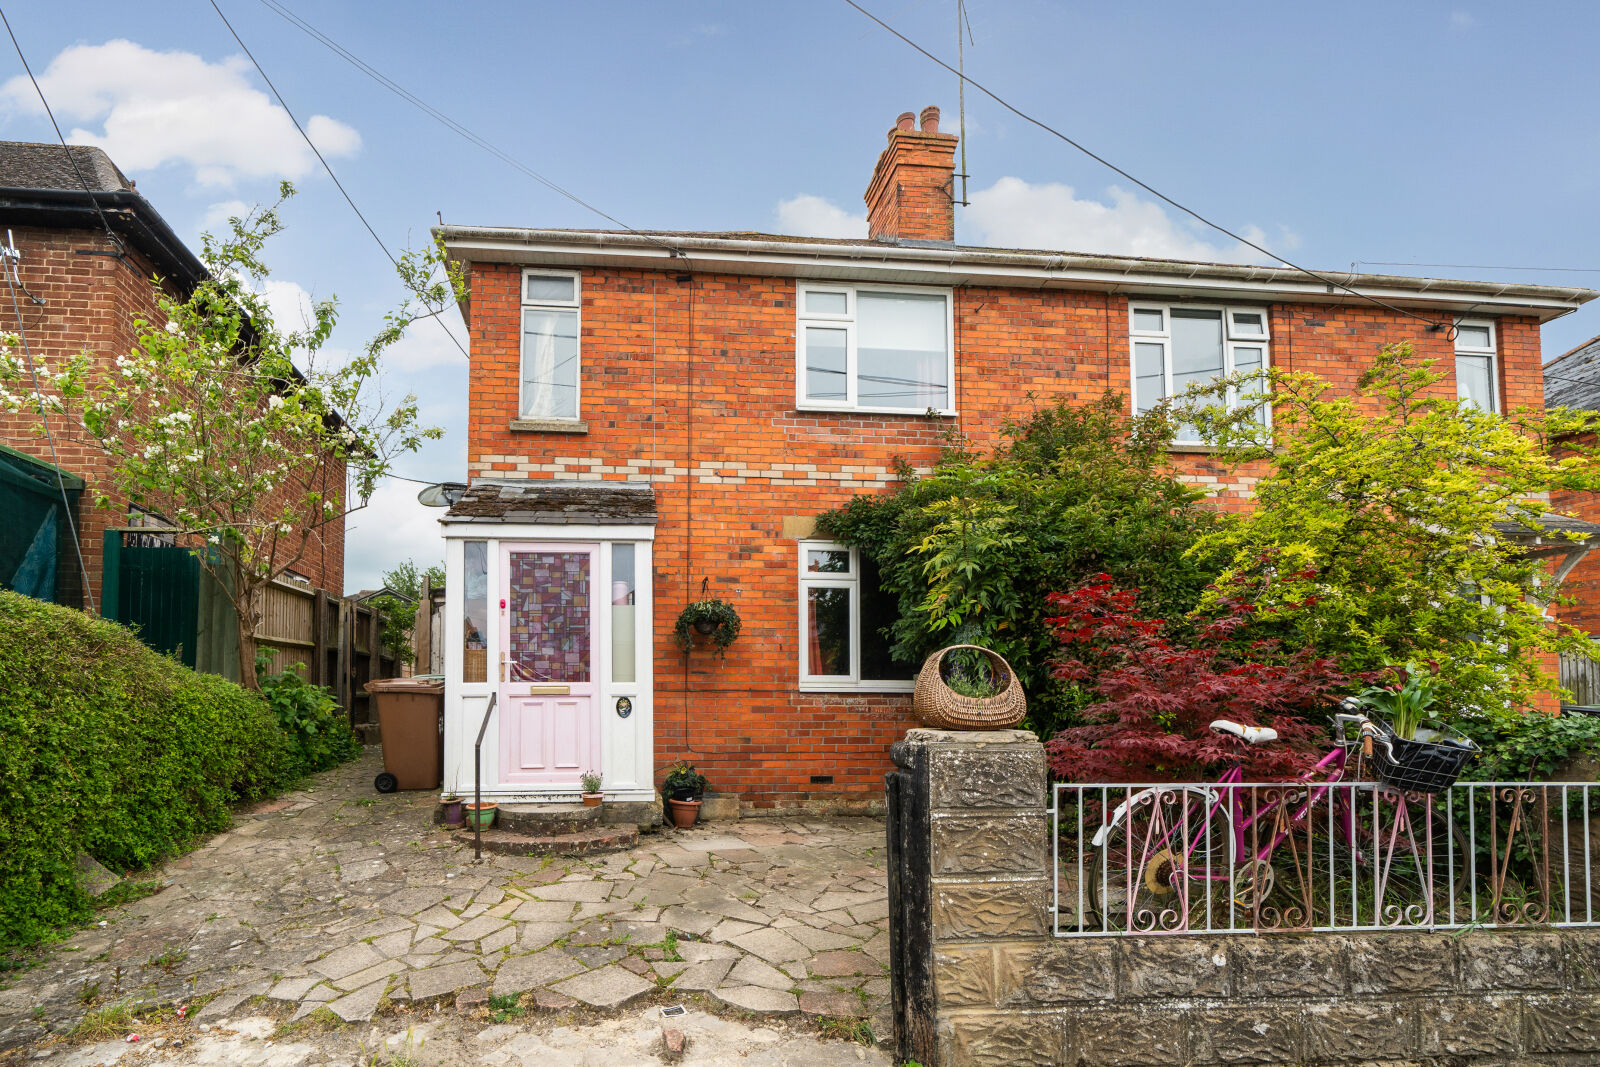 2 bedroom semi detached house for sale Springfield Road, Wantage, OX12, main image